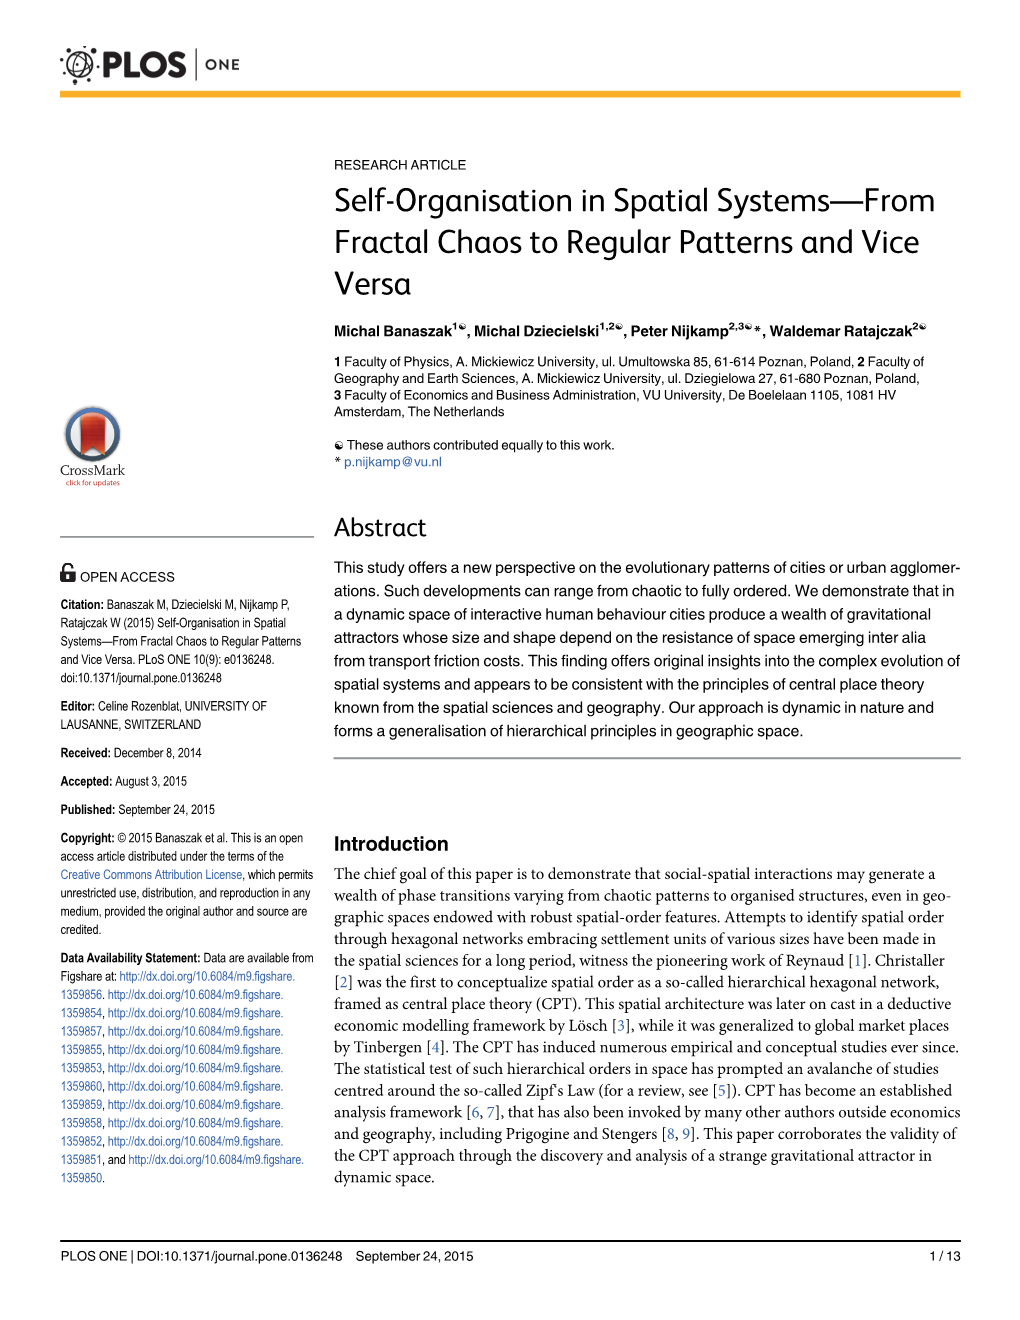 Self-Organisation in Spatial Systems—From Fractal Chaos to Regular Patterns and Vice Versa